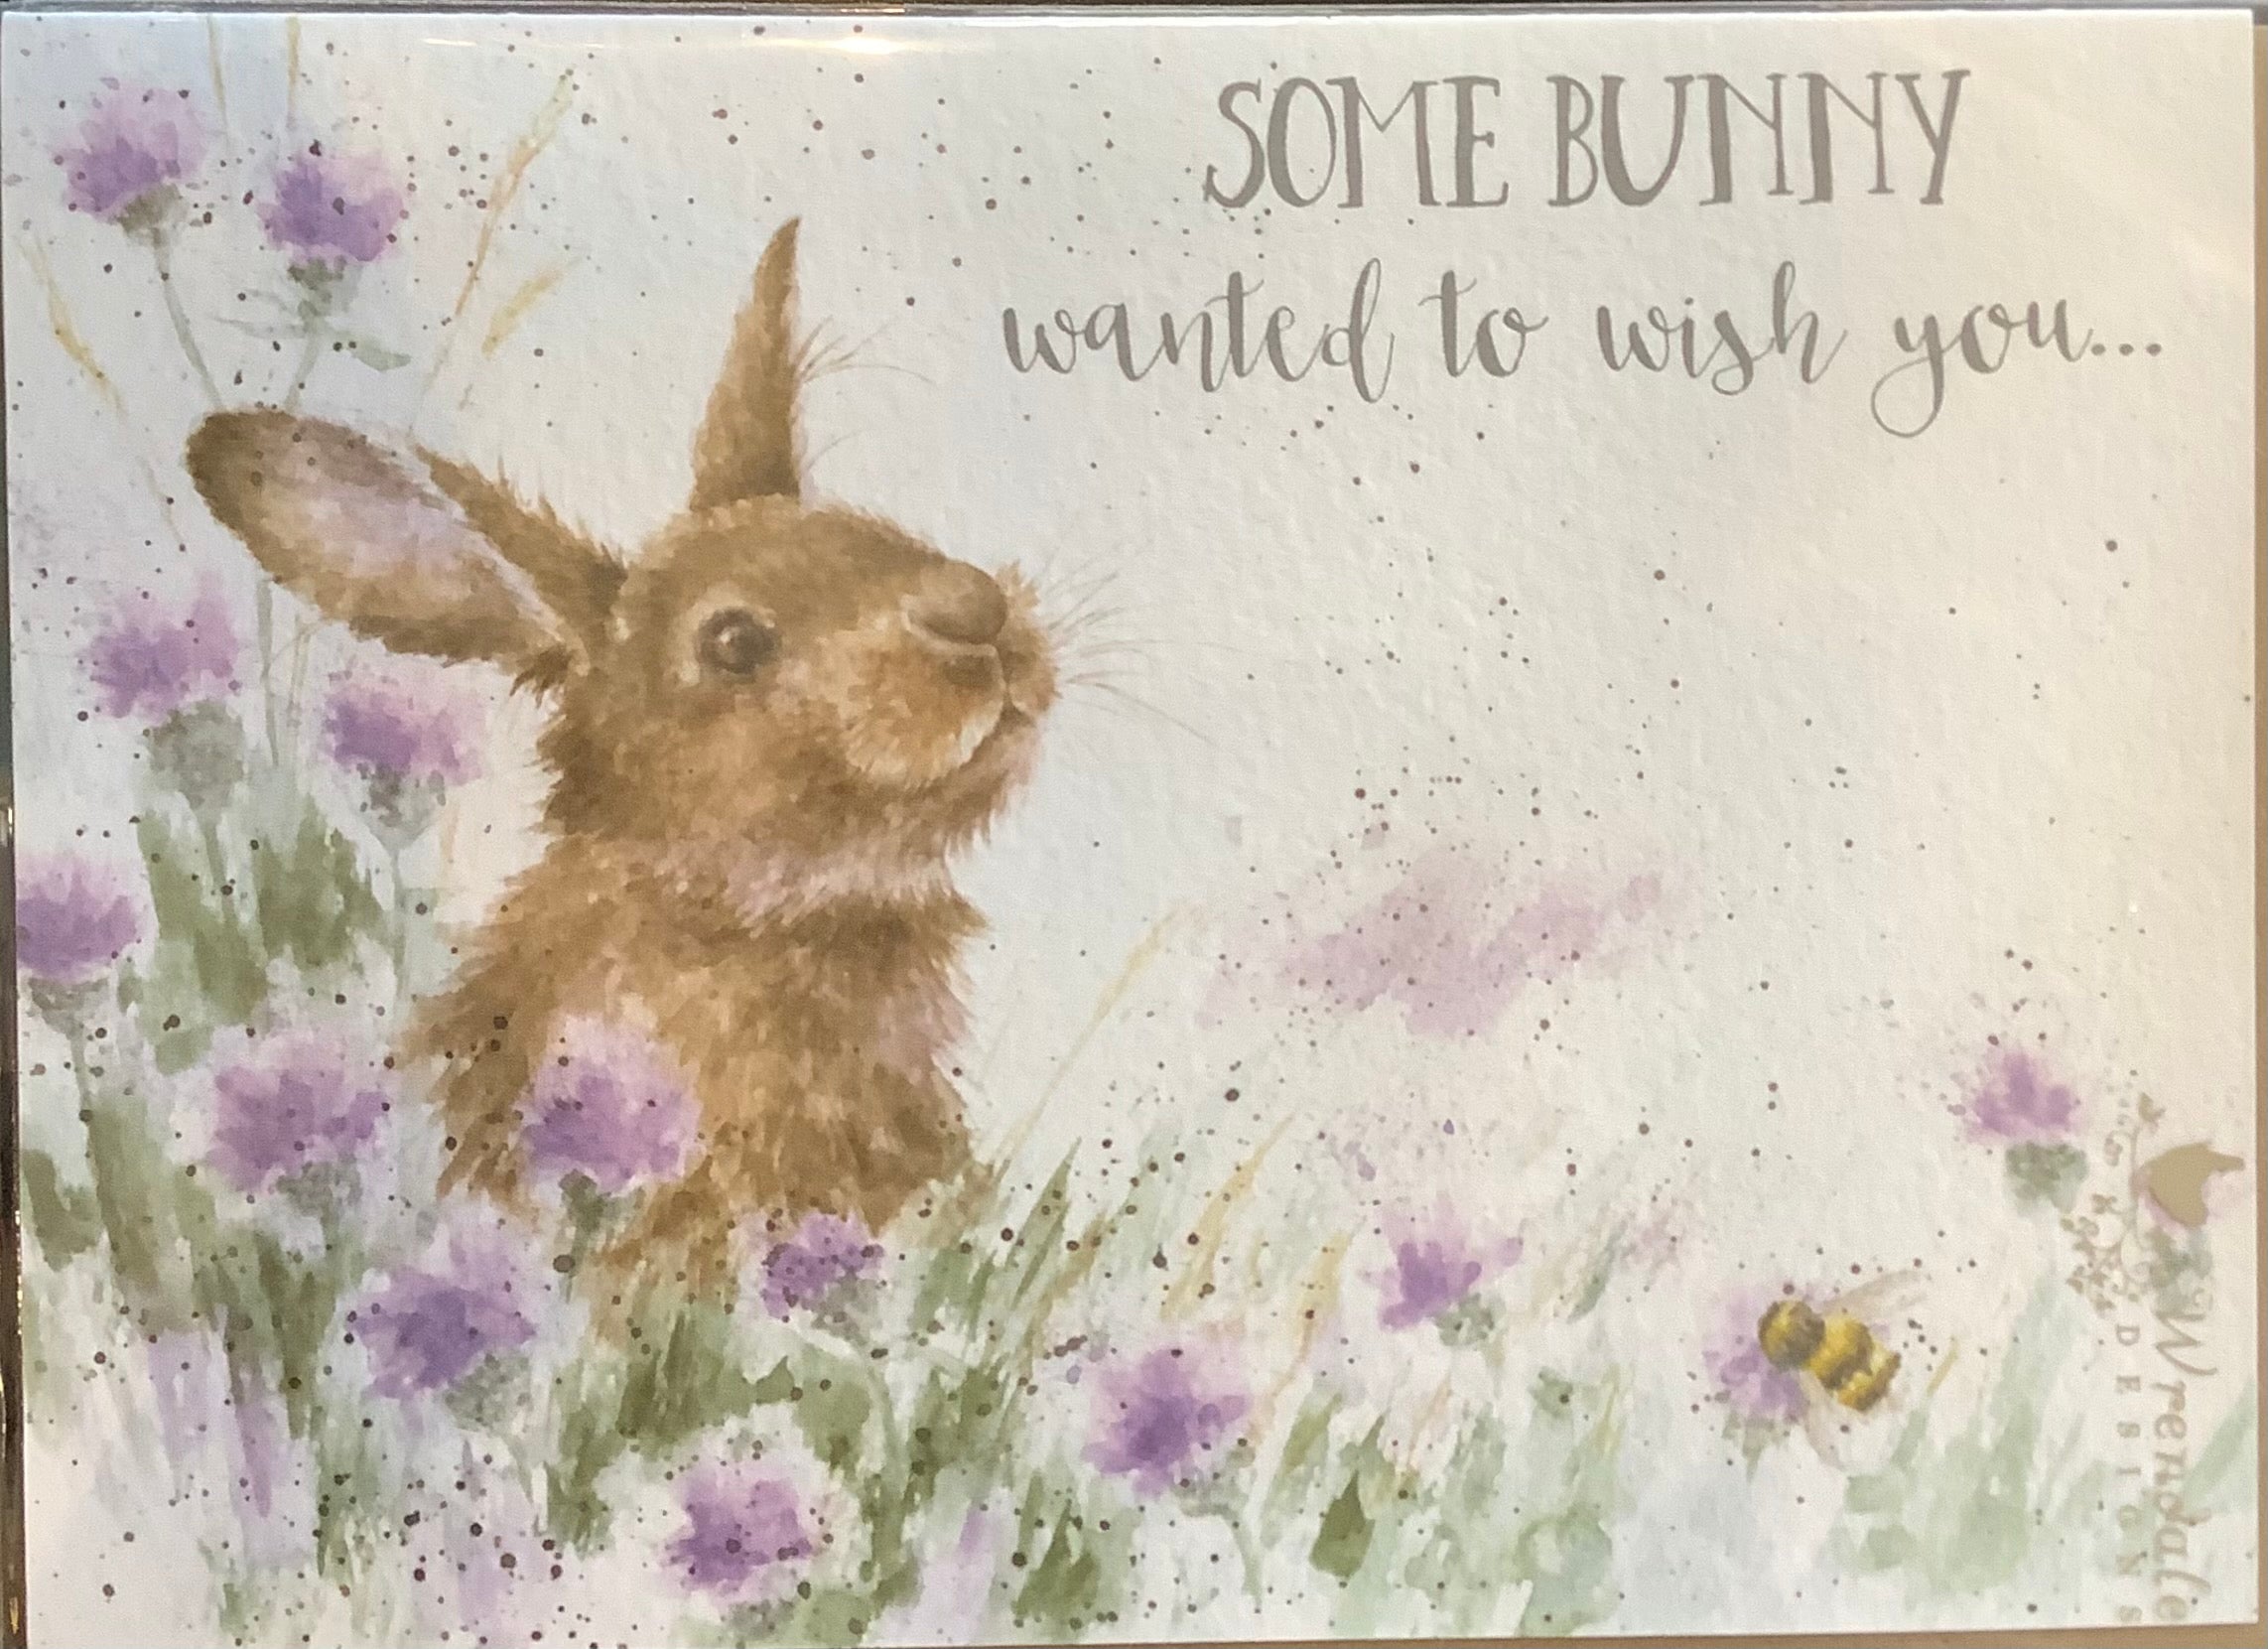 Greeting Card - “Some Bunny wanted to wish you”